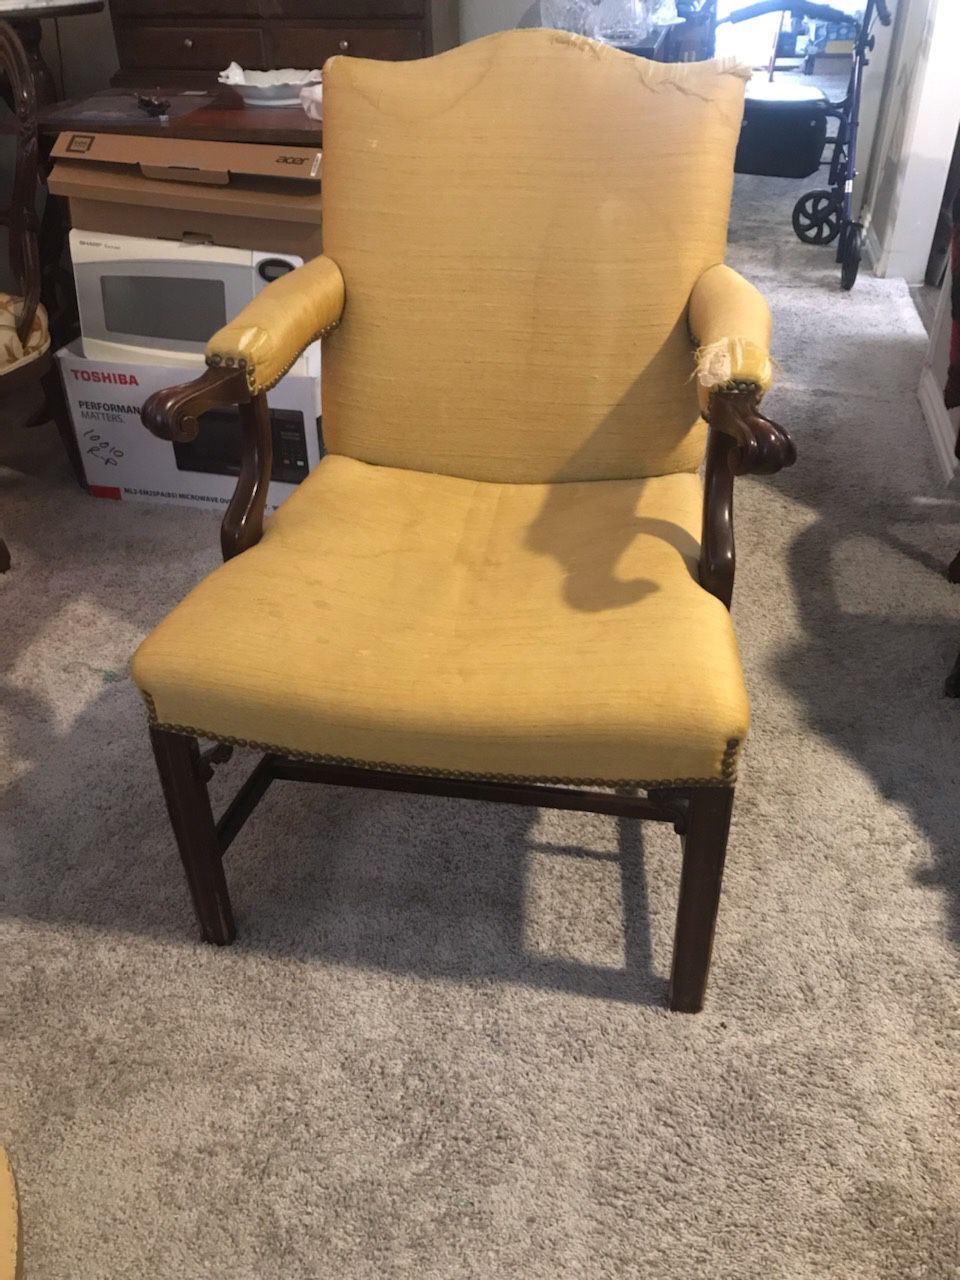 FREE! 1940s Chair - Needs Reupholstering